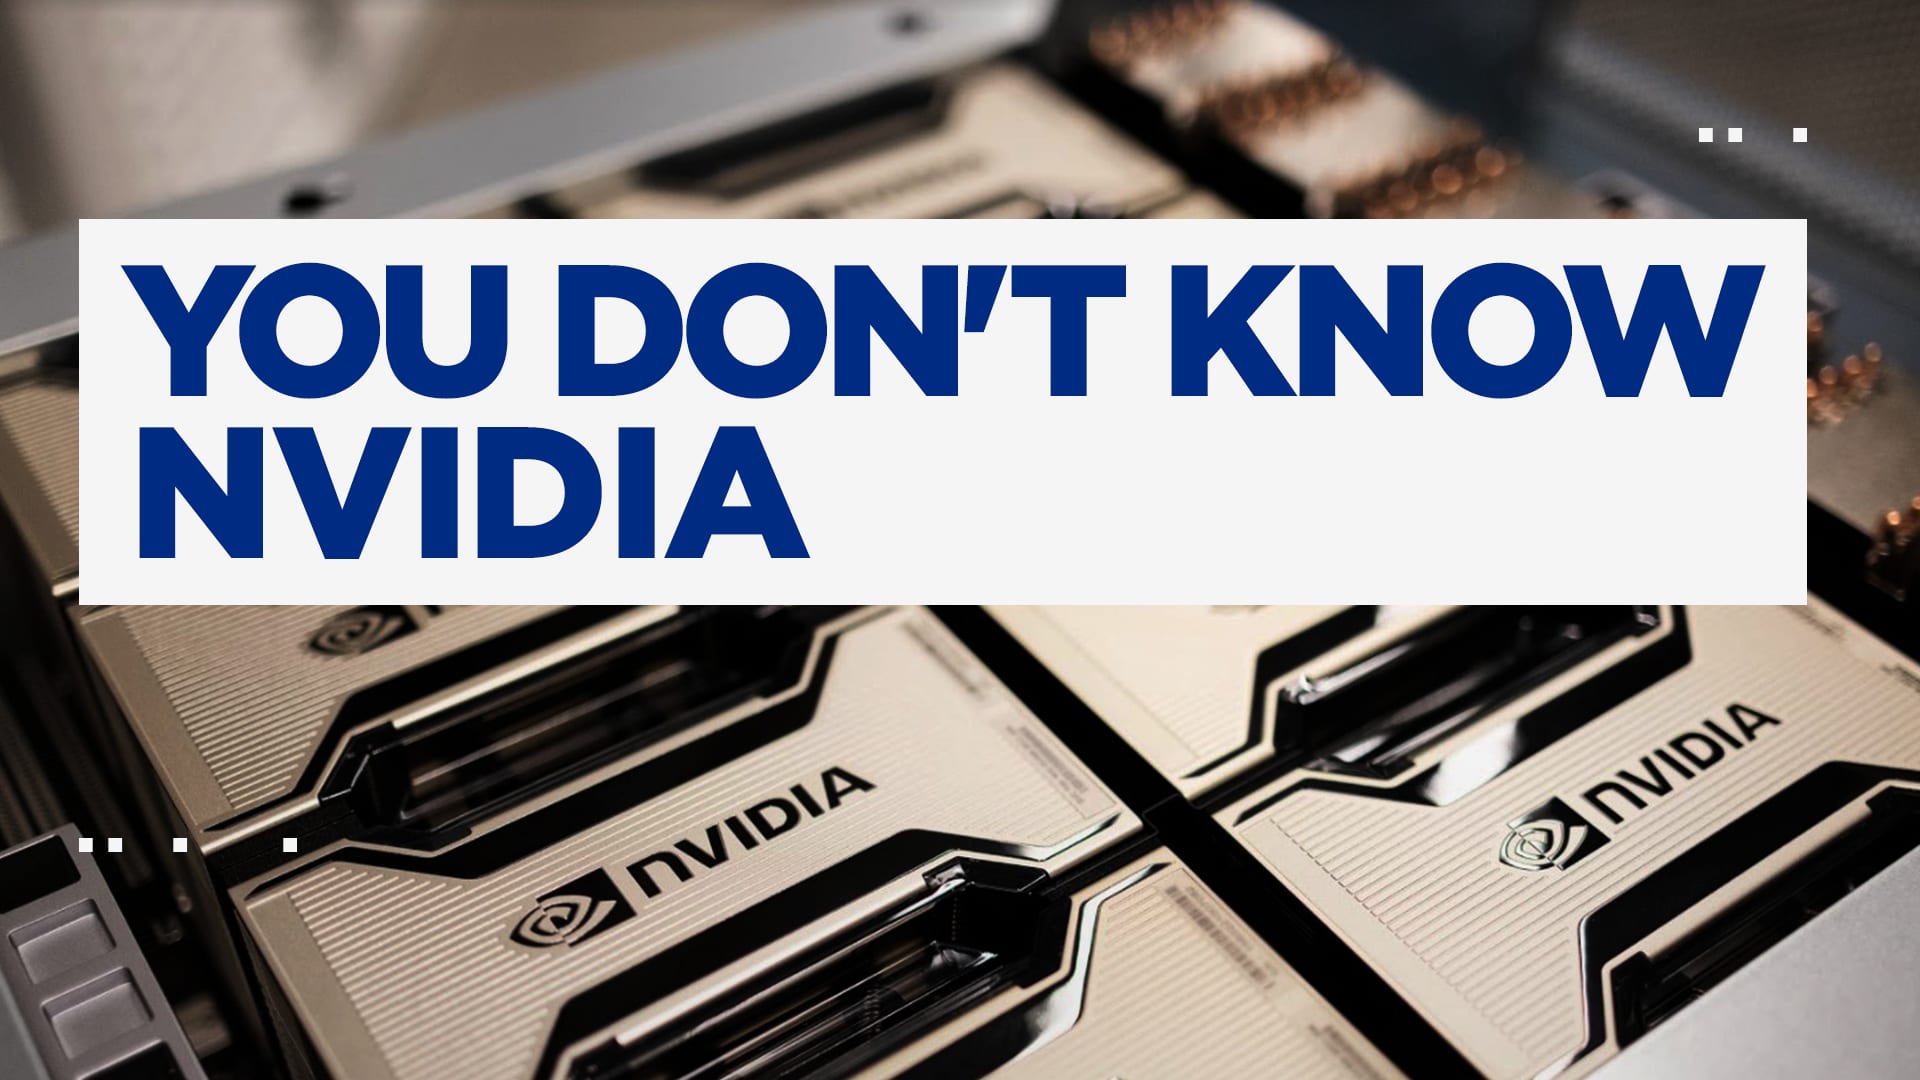 You don't know Nvidia